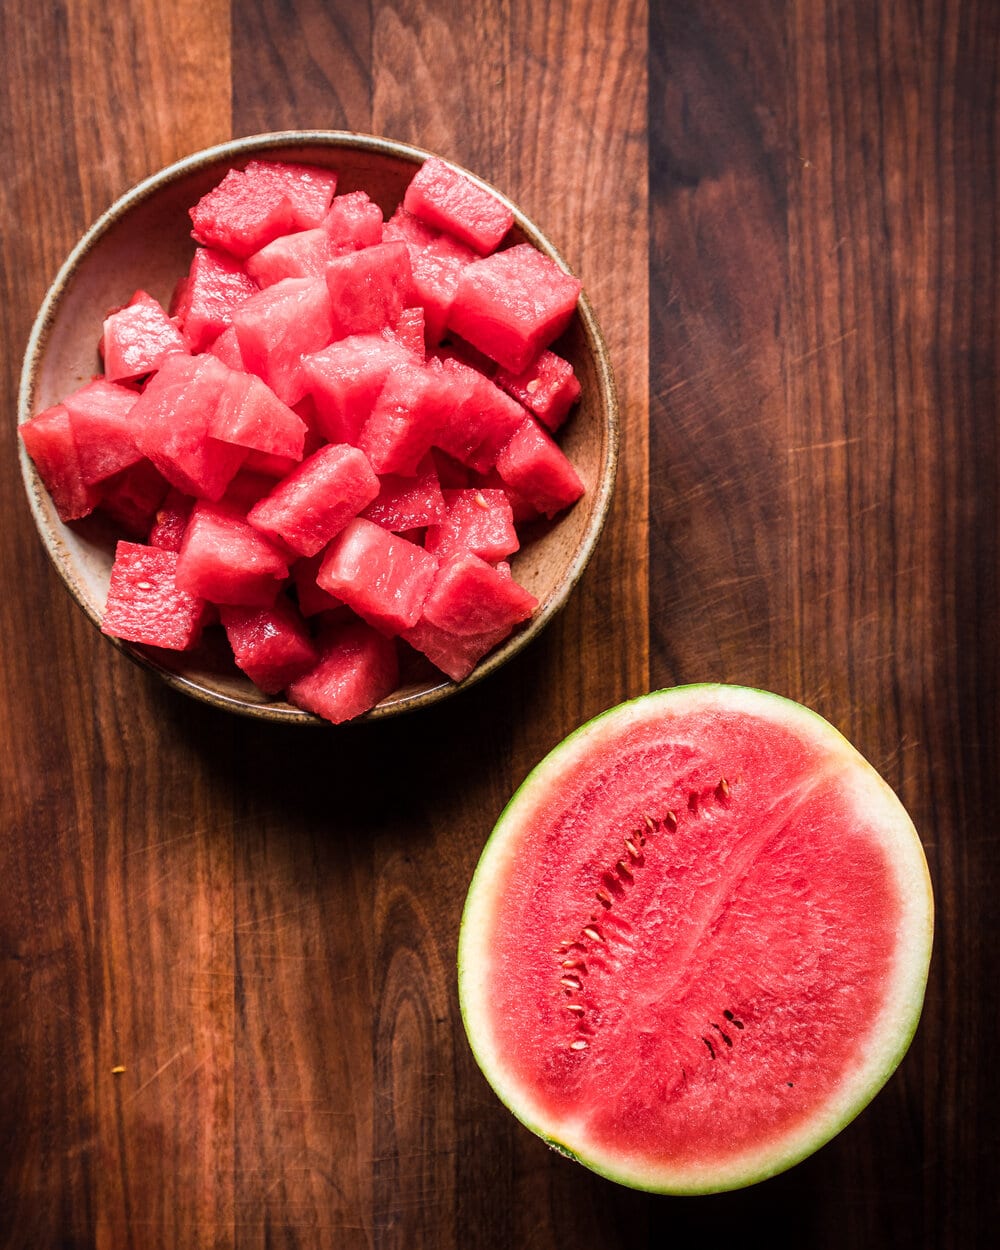 Half a watermelon and a bowl of diced watermelon on a wooden table.